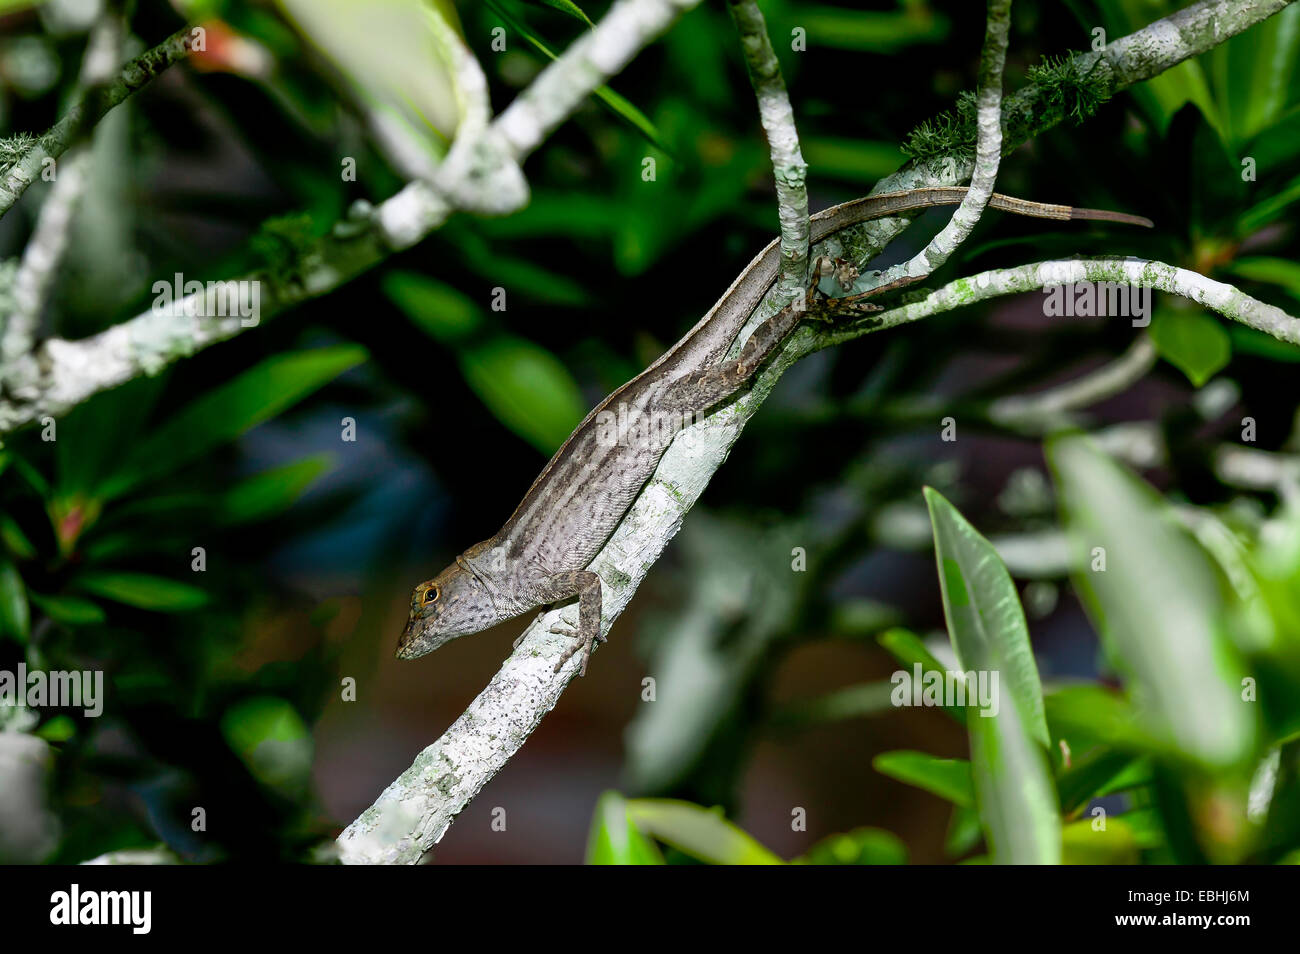 Brown Anole Lizard resting on tree branch showing full length body and regenerated tail, Florida, USA. Stock Photo